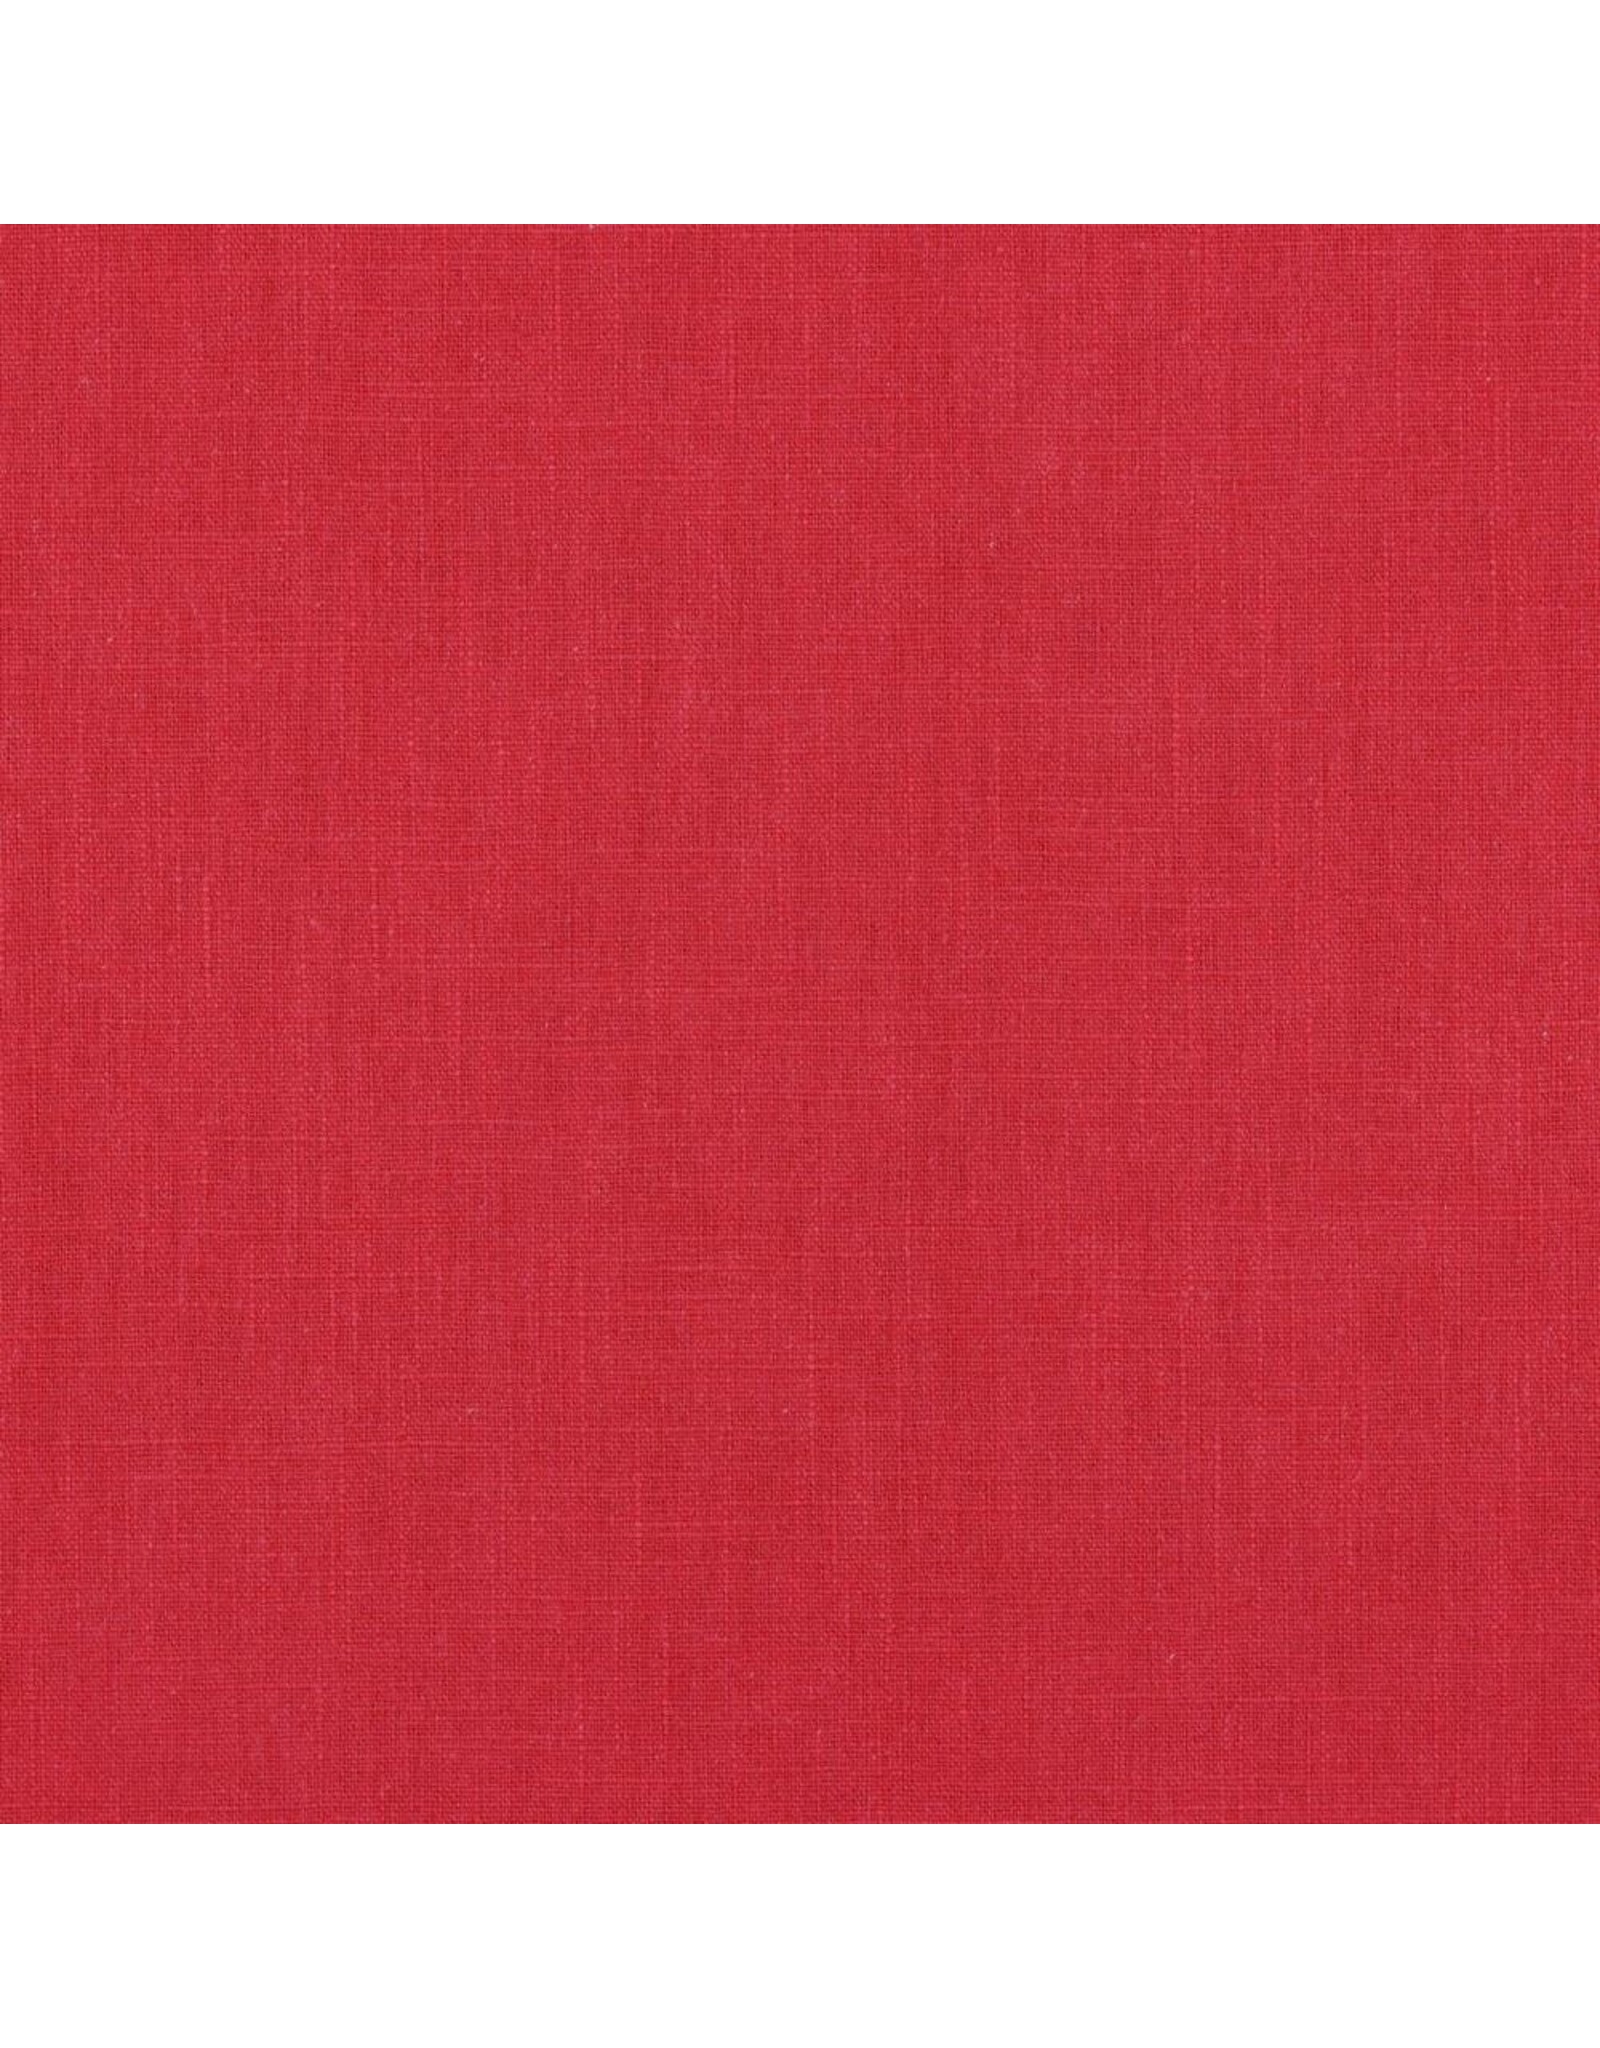 Linen washed red